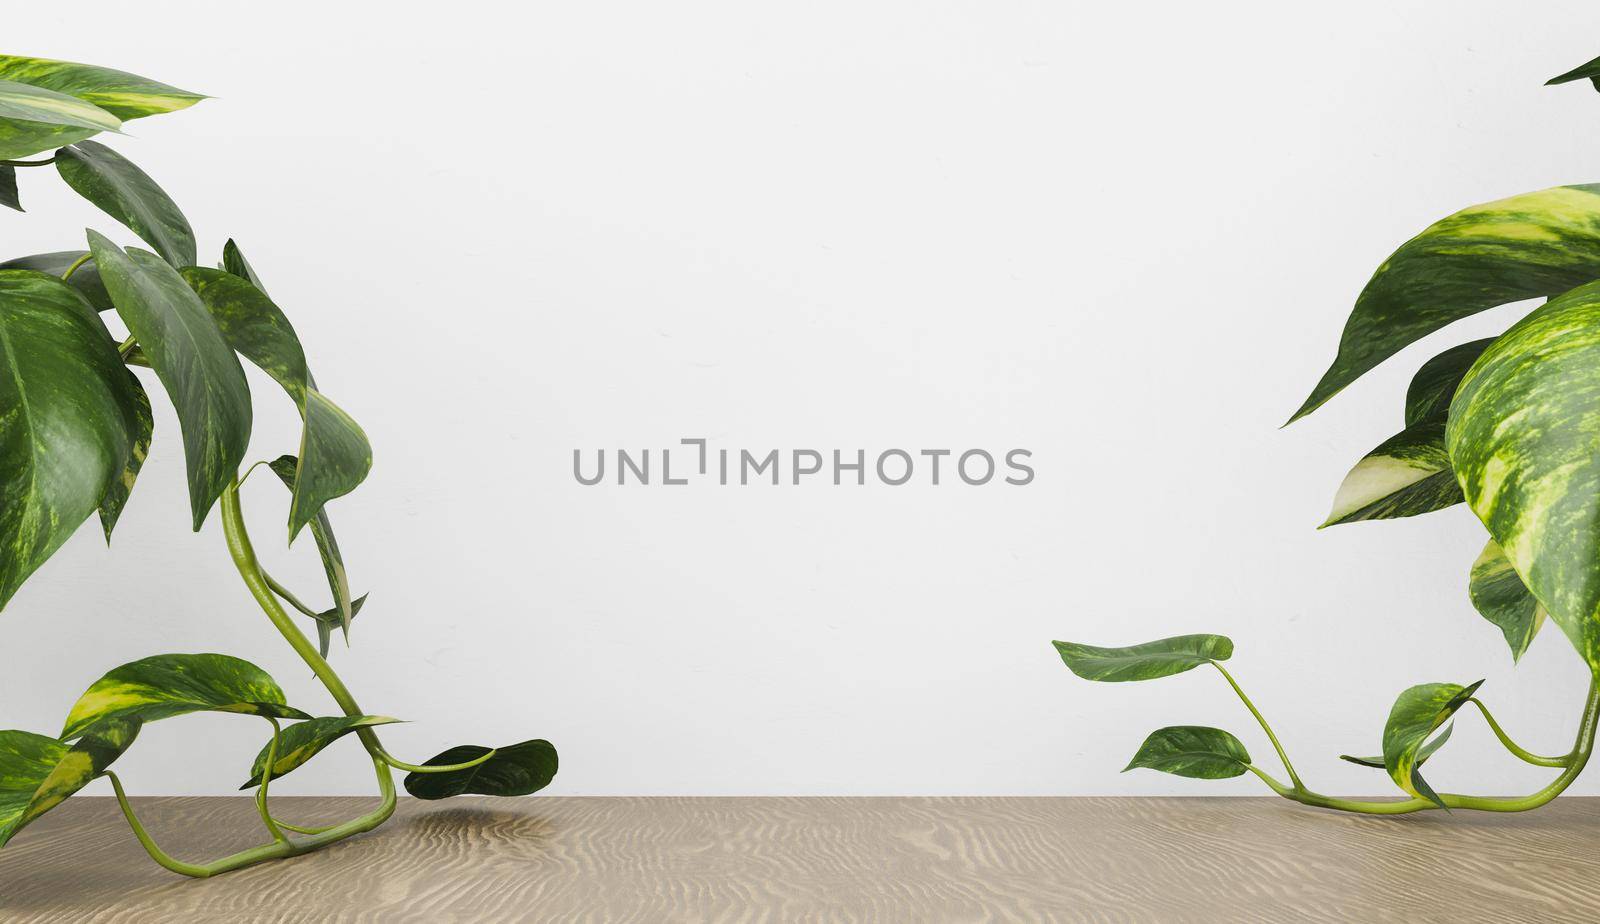 dark wood table with plants on the sides and white back wall for product display. 3d render